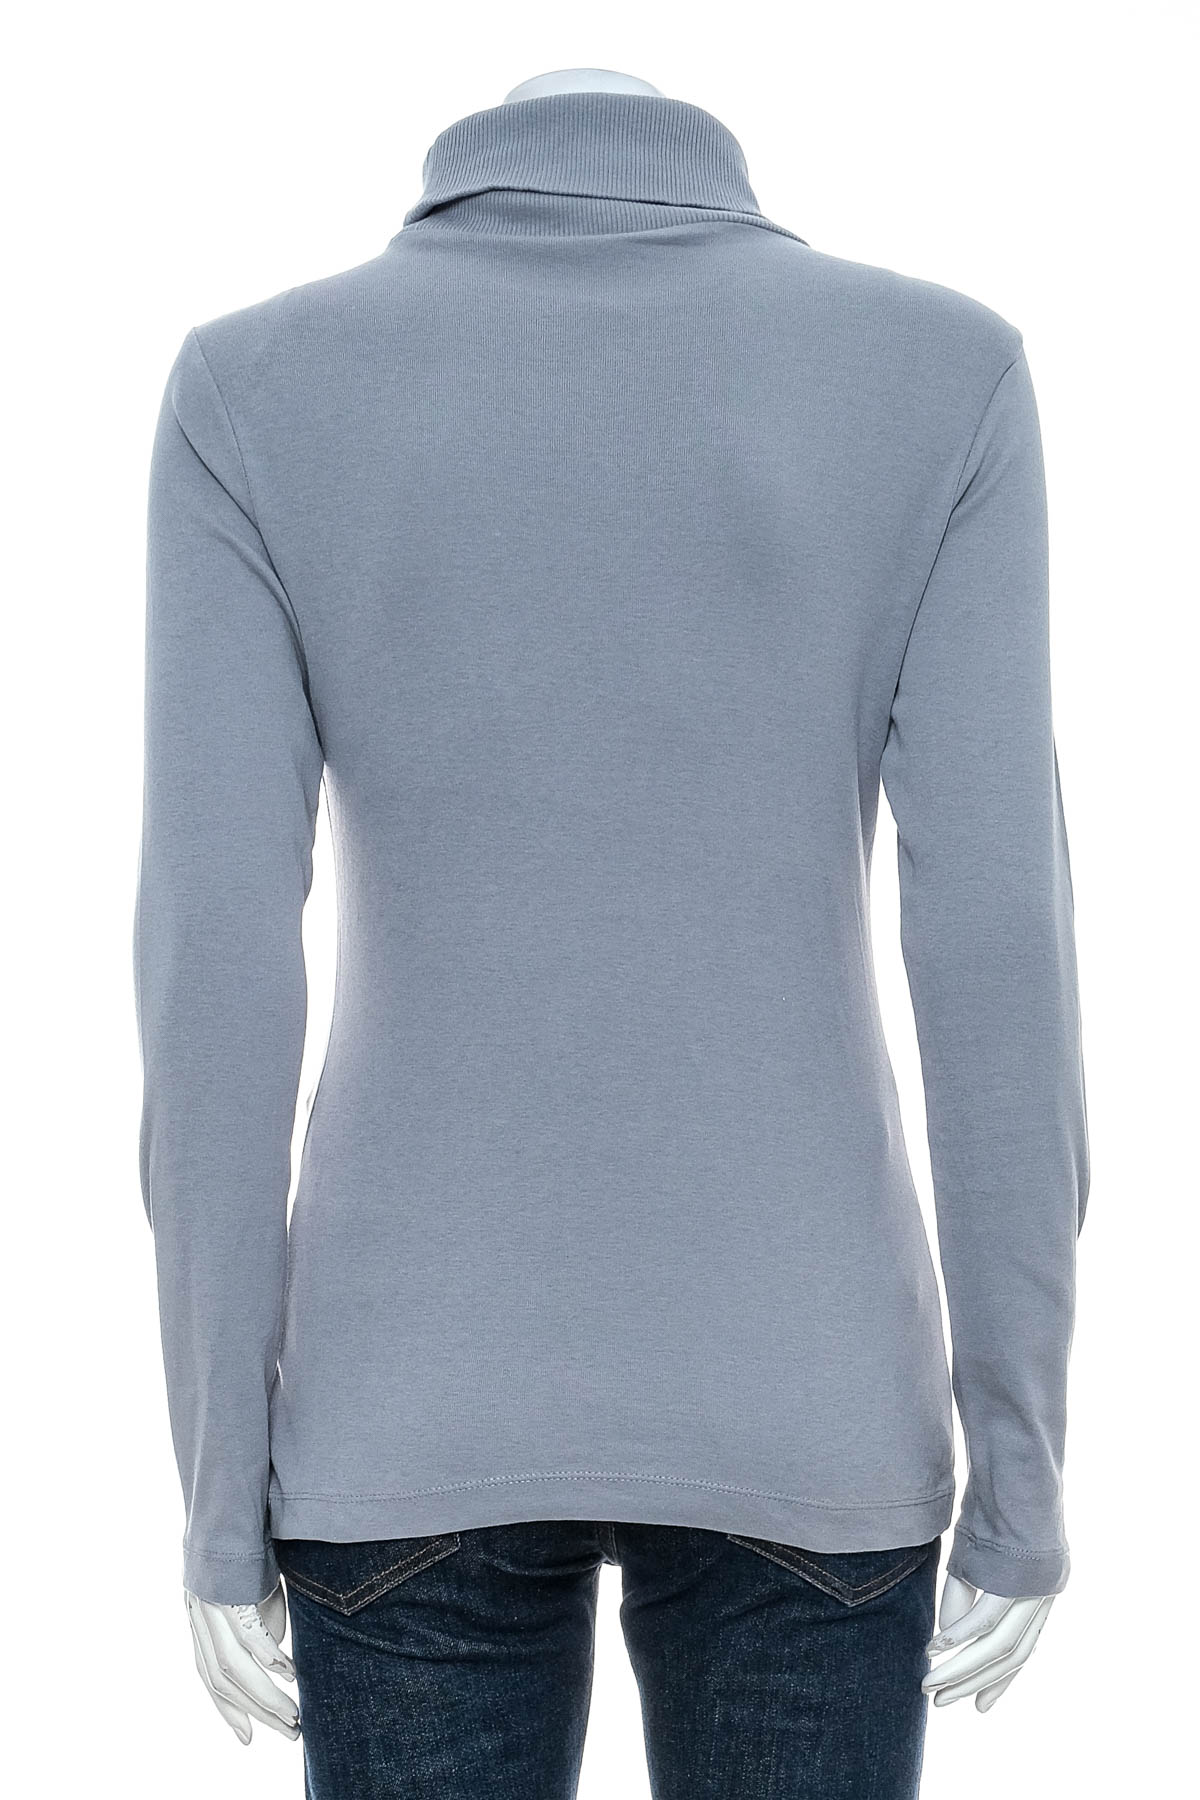 Women's sweater - QS by S.Oliver - 1